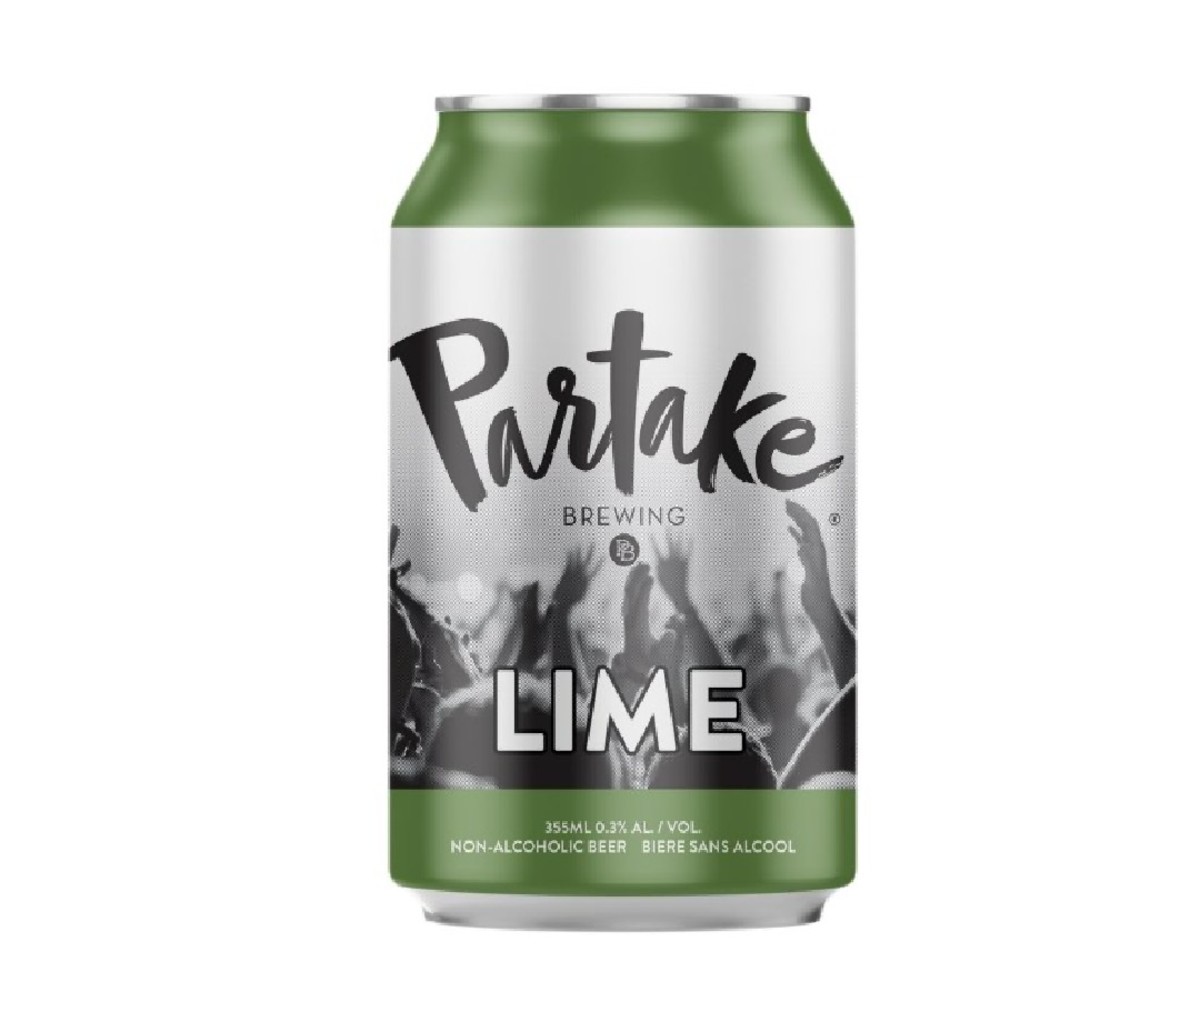 12 oz can of Partake Brewing Lime nonalcoholic beer